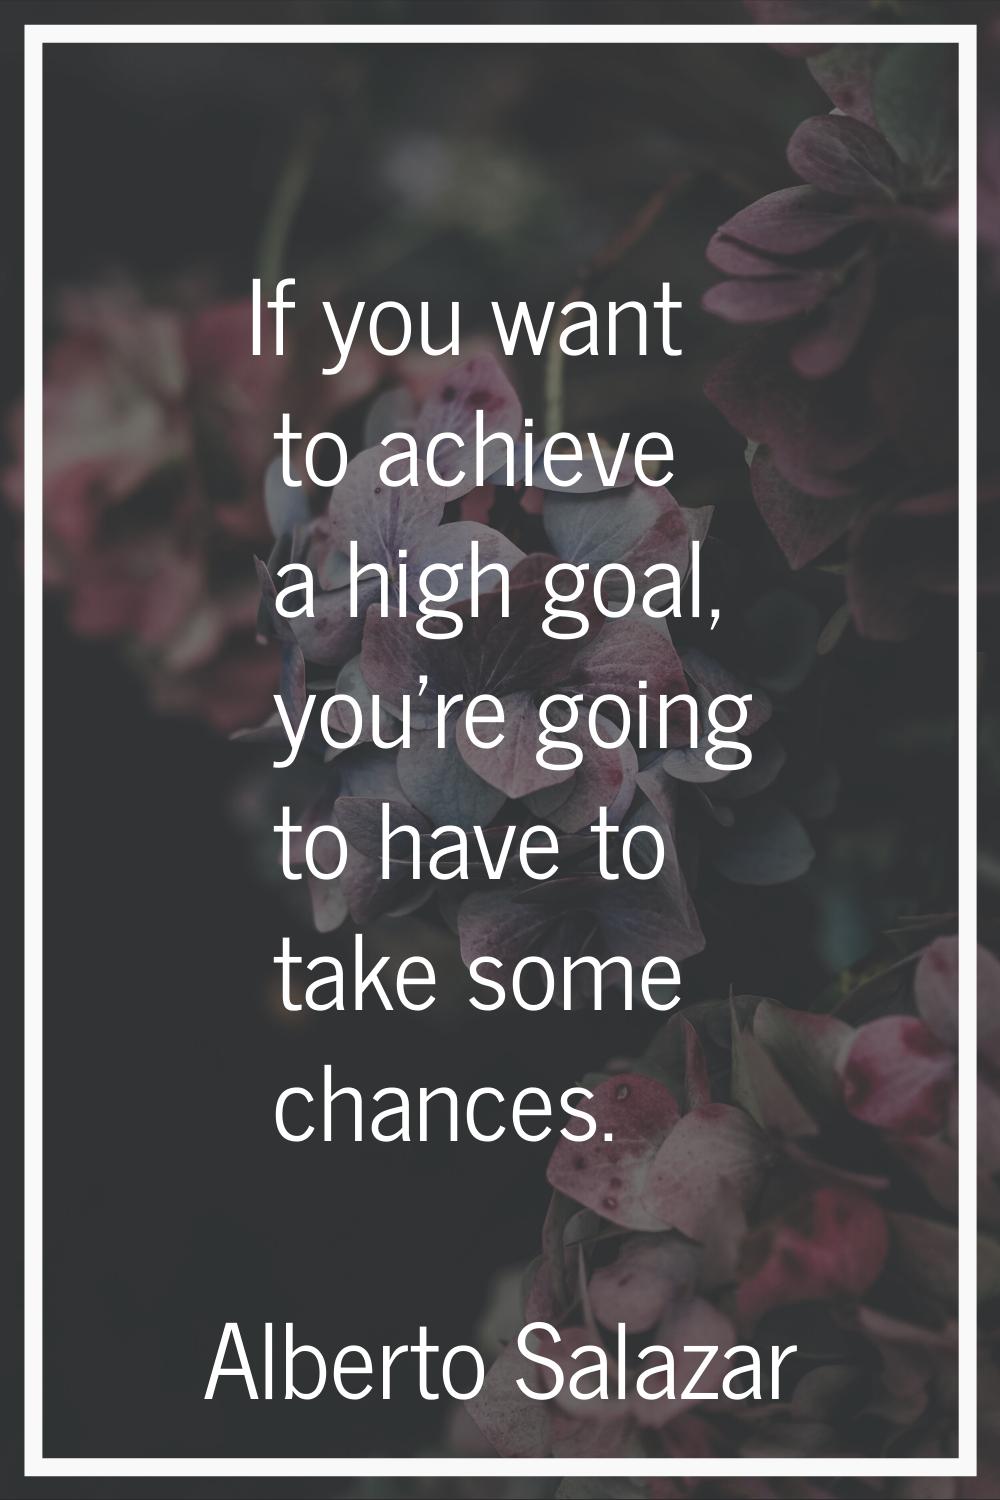 If you want to achieve a high goal, you're going to have to take some chances.